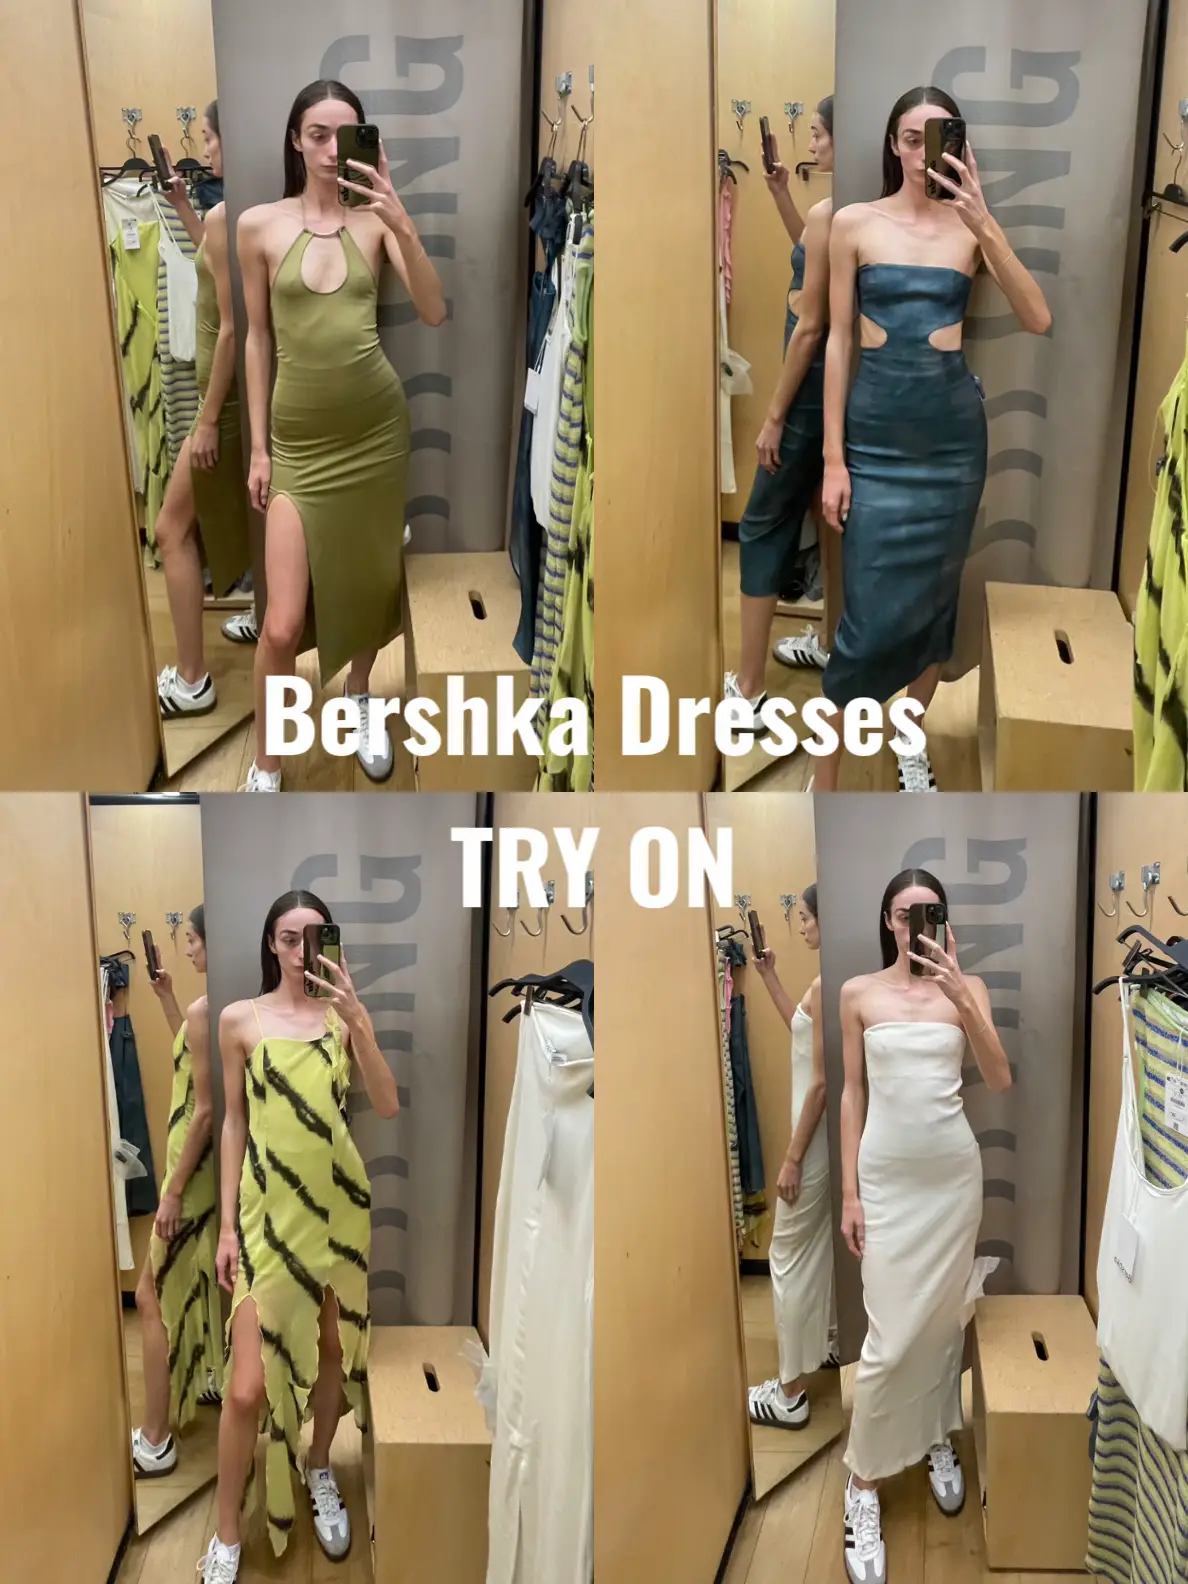 This Berskha Skims Dress Lookalike Is Perfect For Holidays